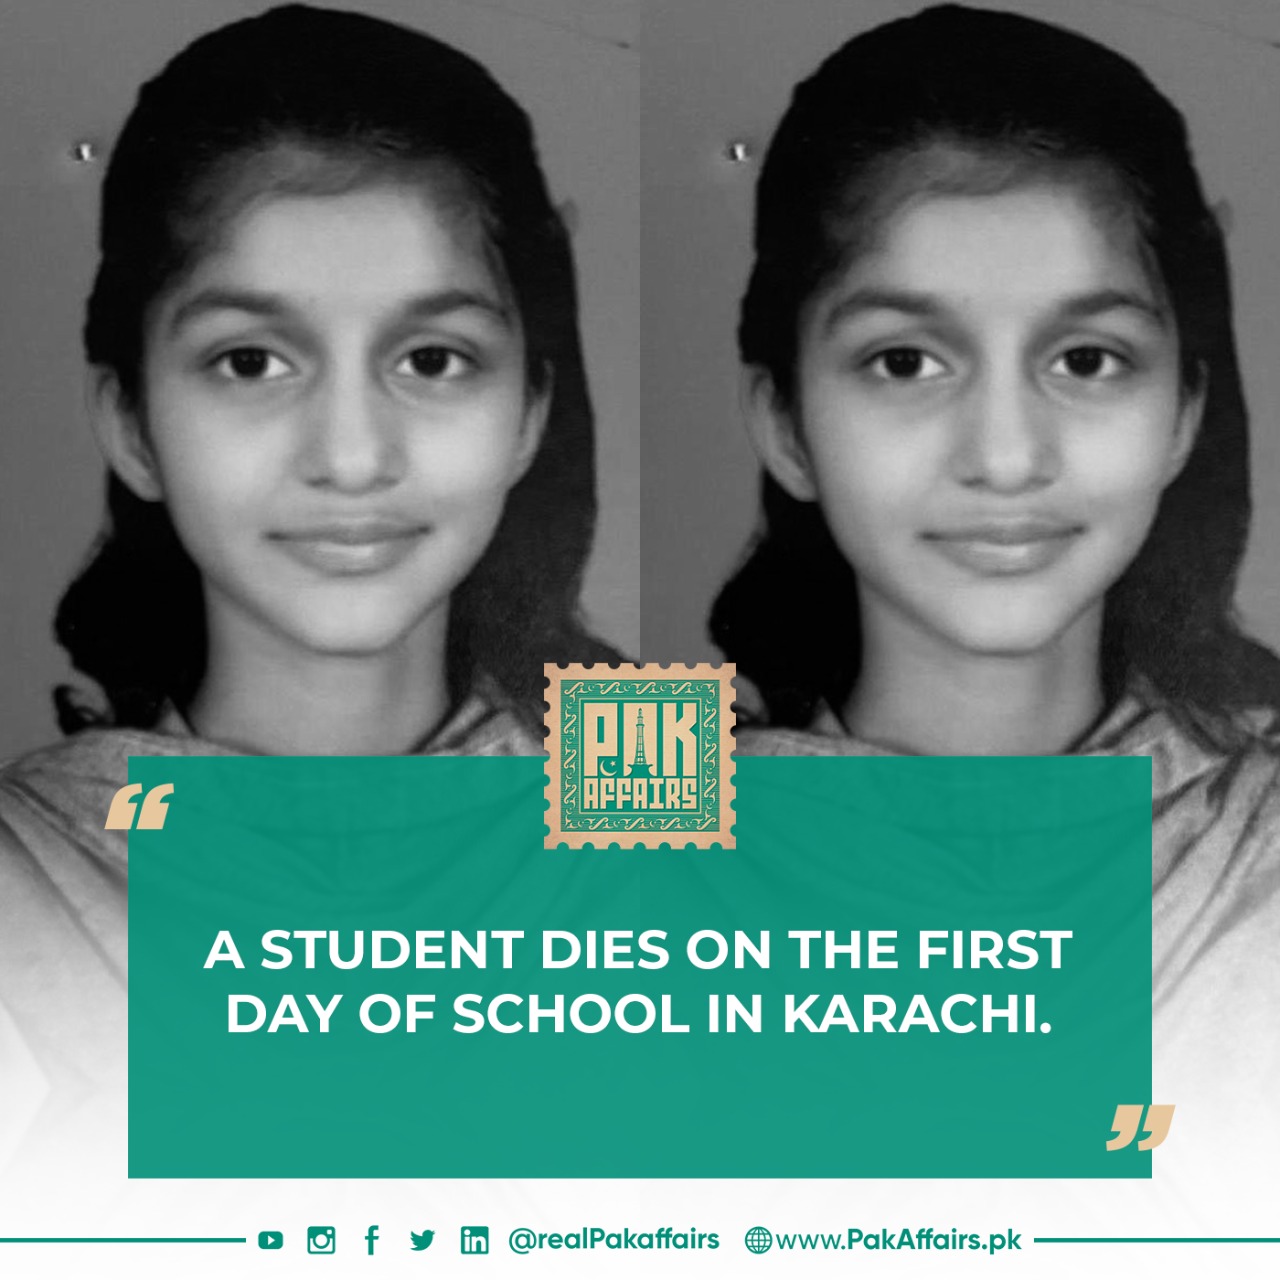 A student dies on the first day of school in Karachi.